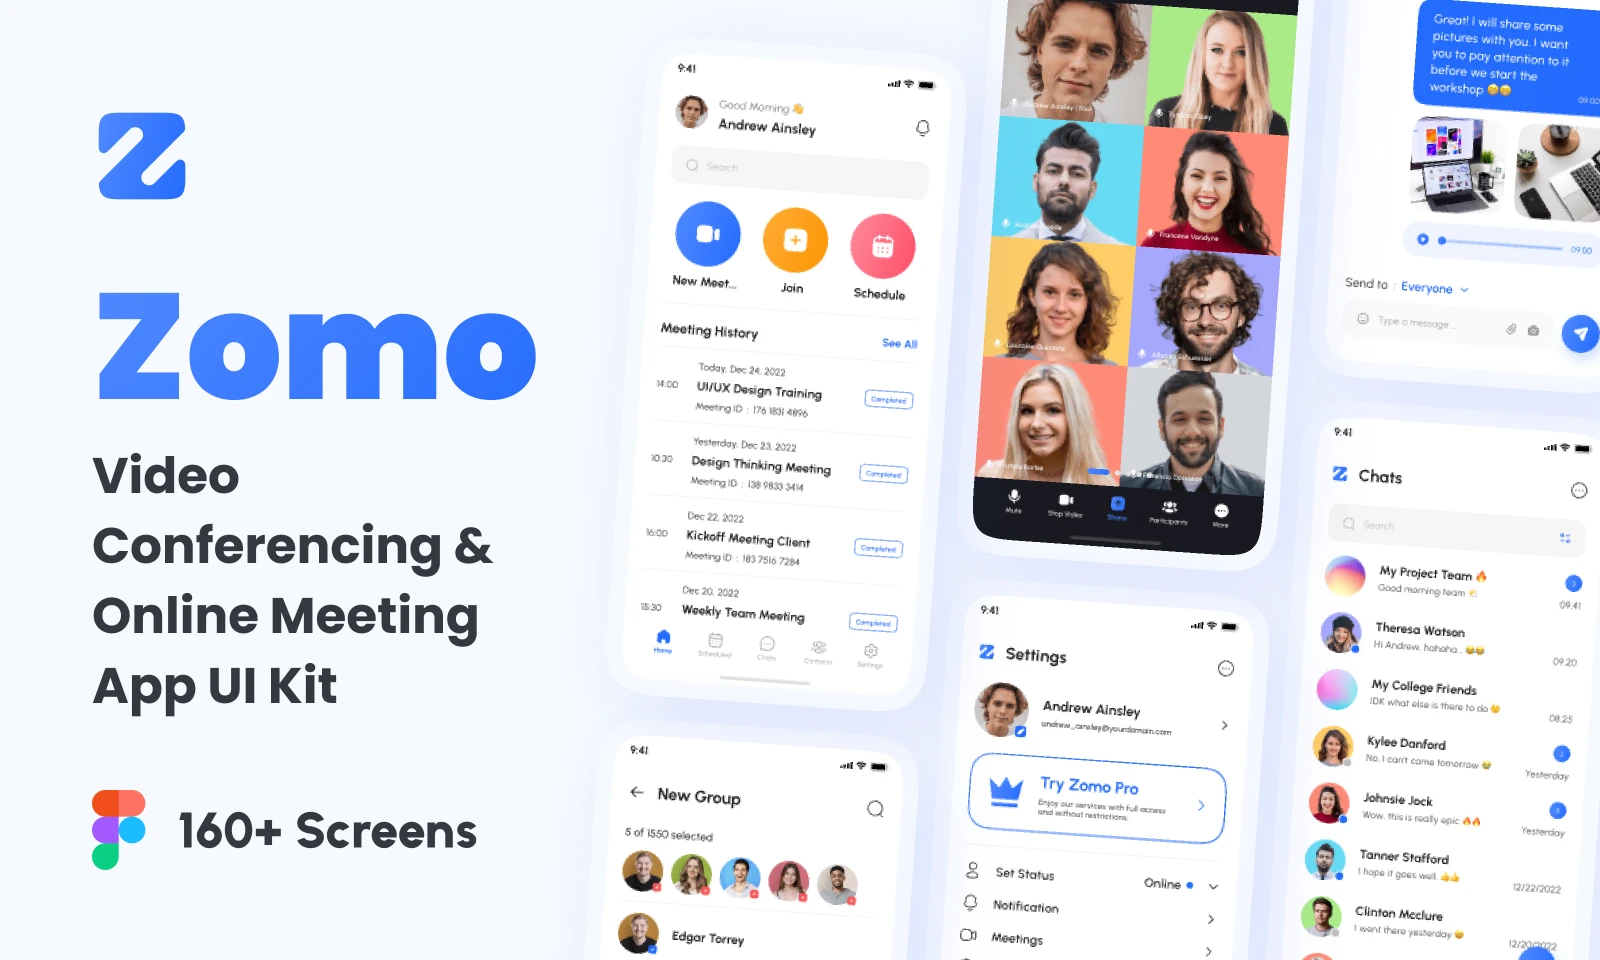 Zomo - Video Conferencing & Online Meeting App UI Kit for Figma and Adobe XD